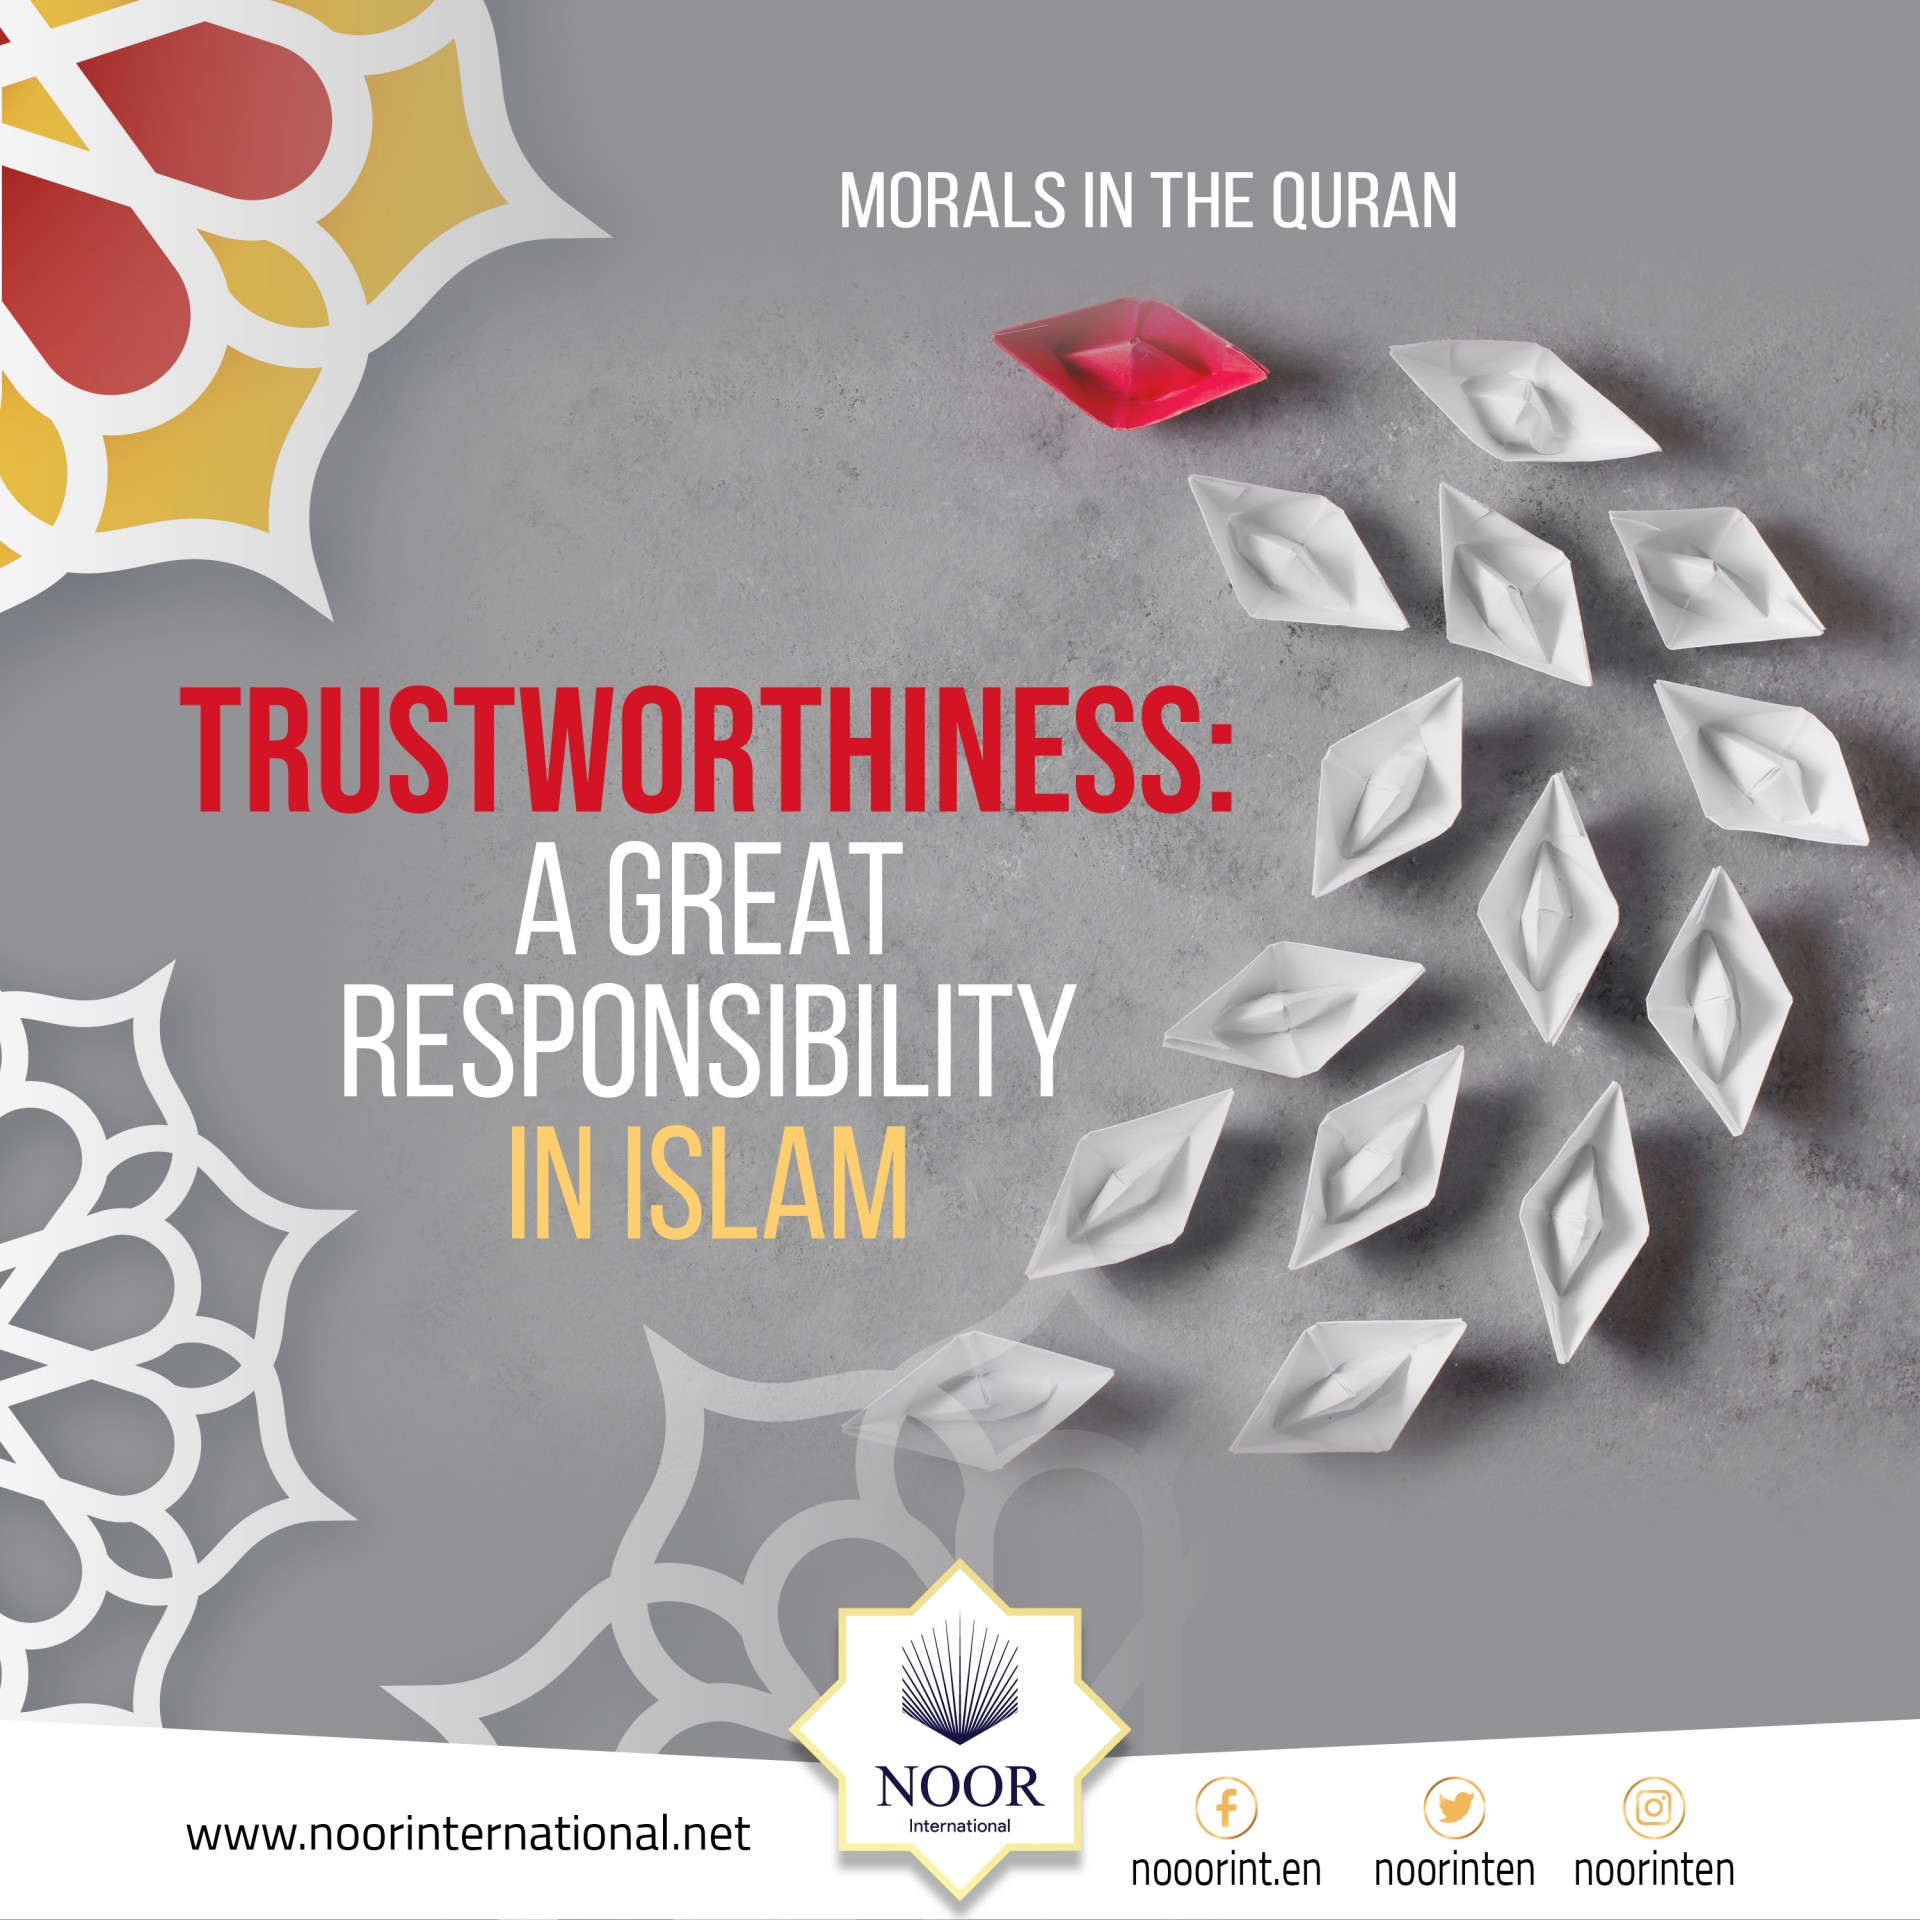 Trustworthiness: A Great Responsibility in Islam